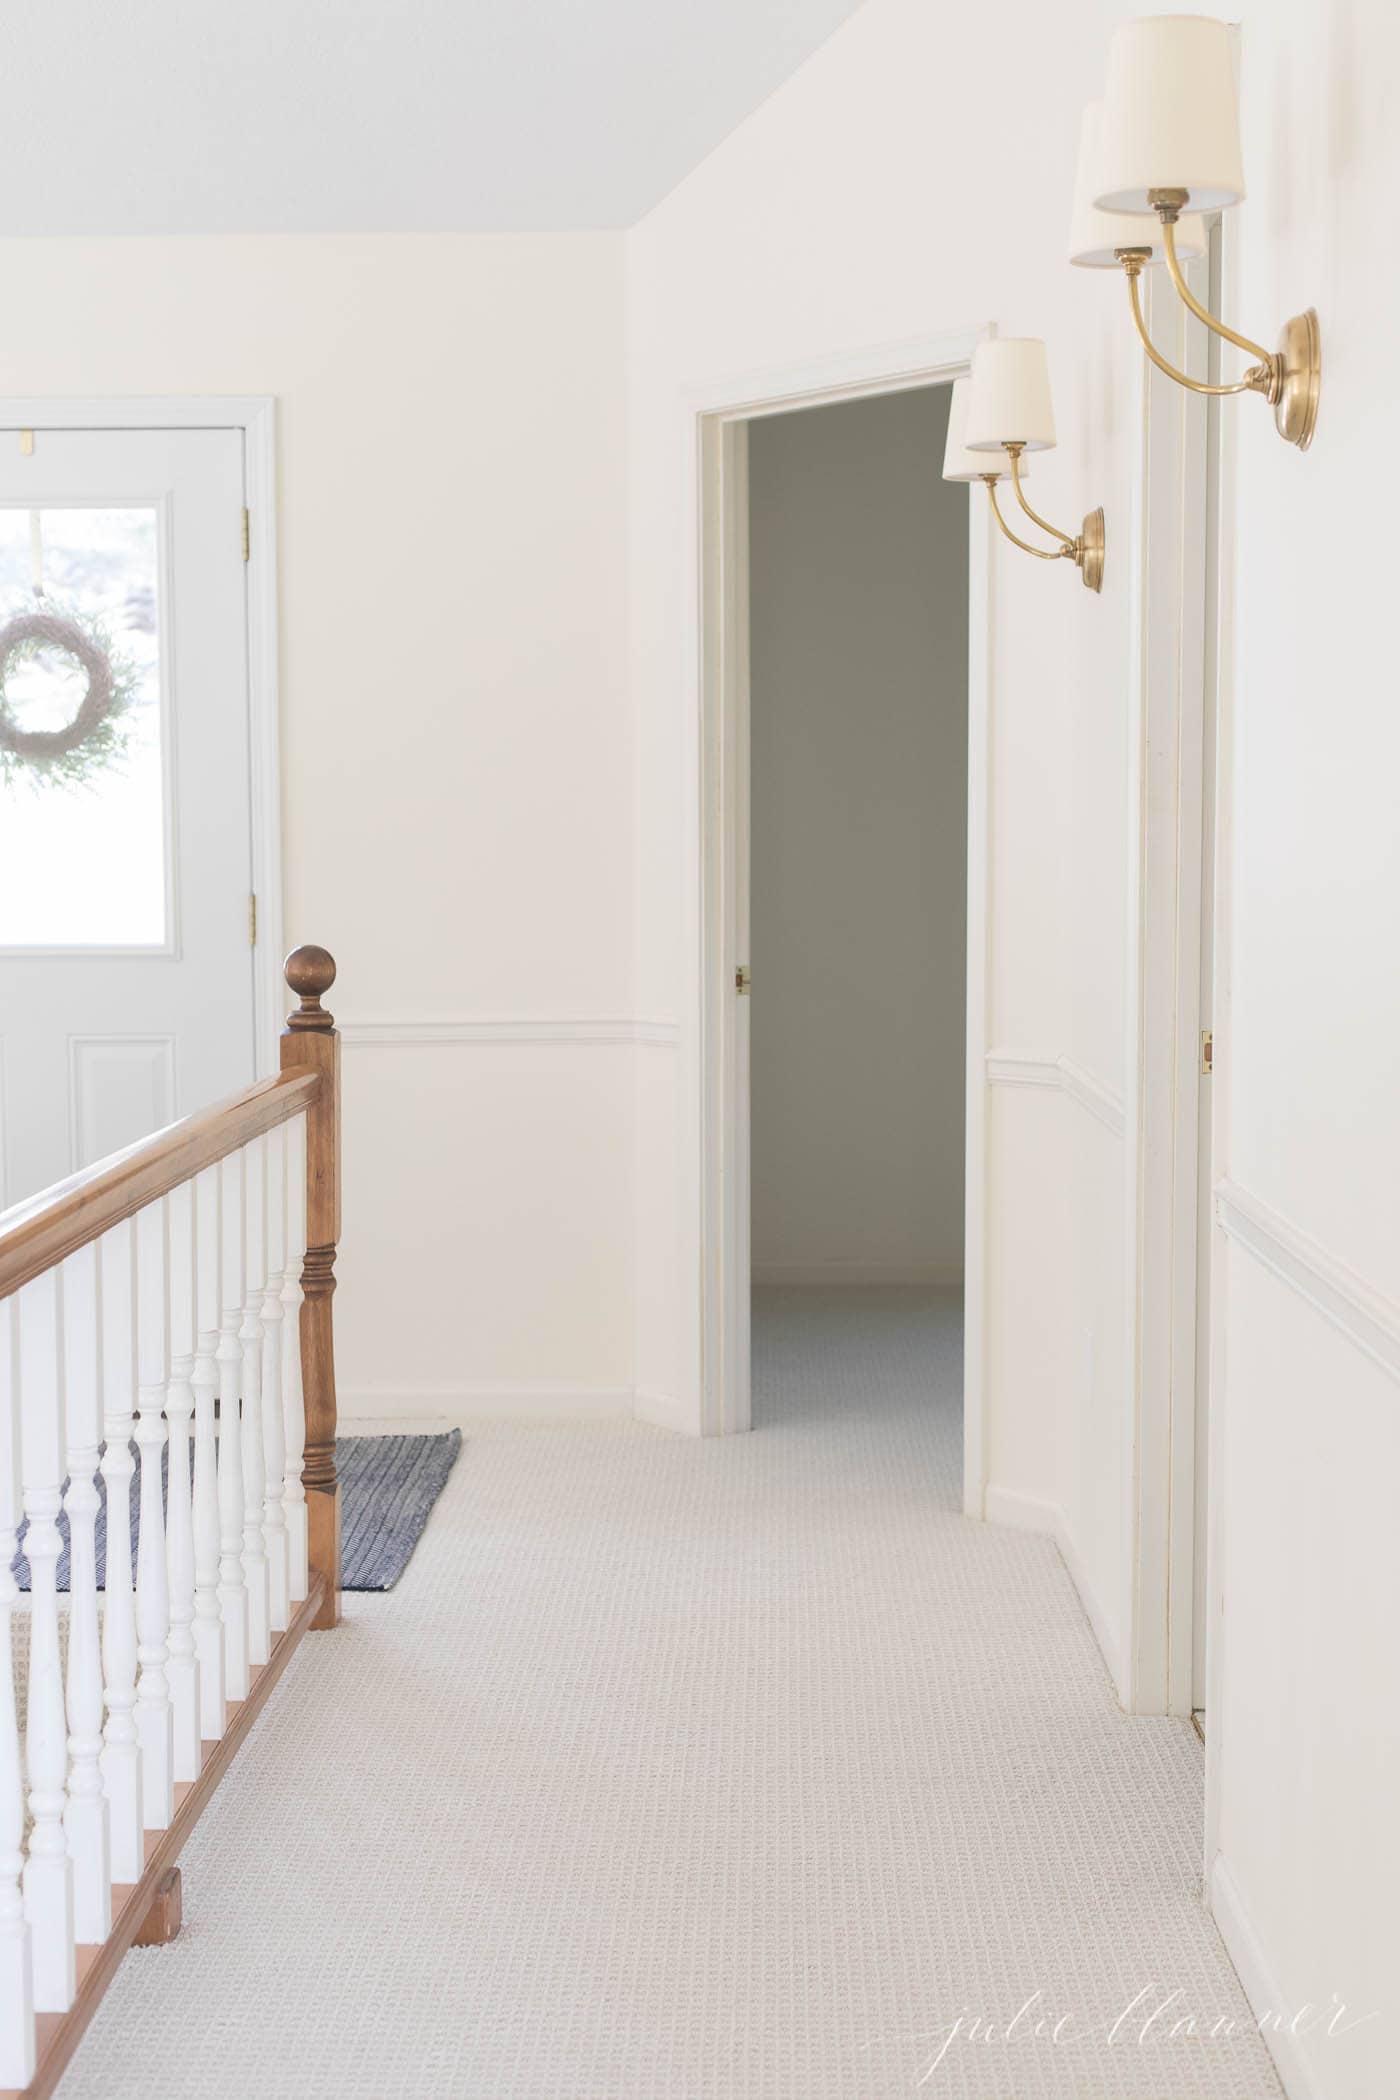 Wall to wall carpet in a hallway with white painted walls